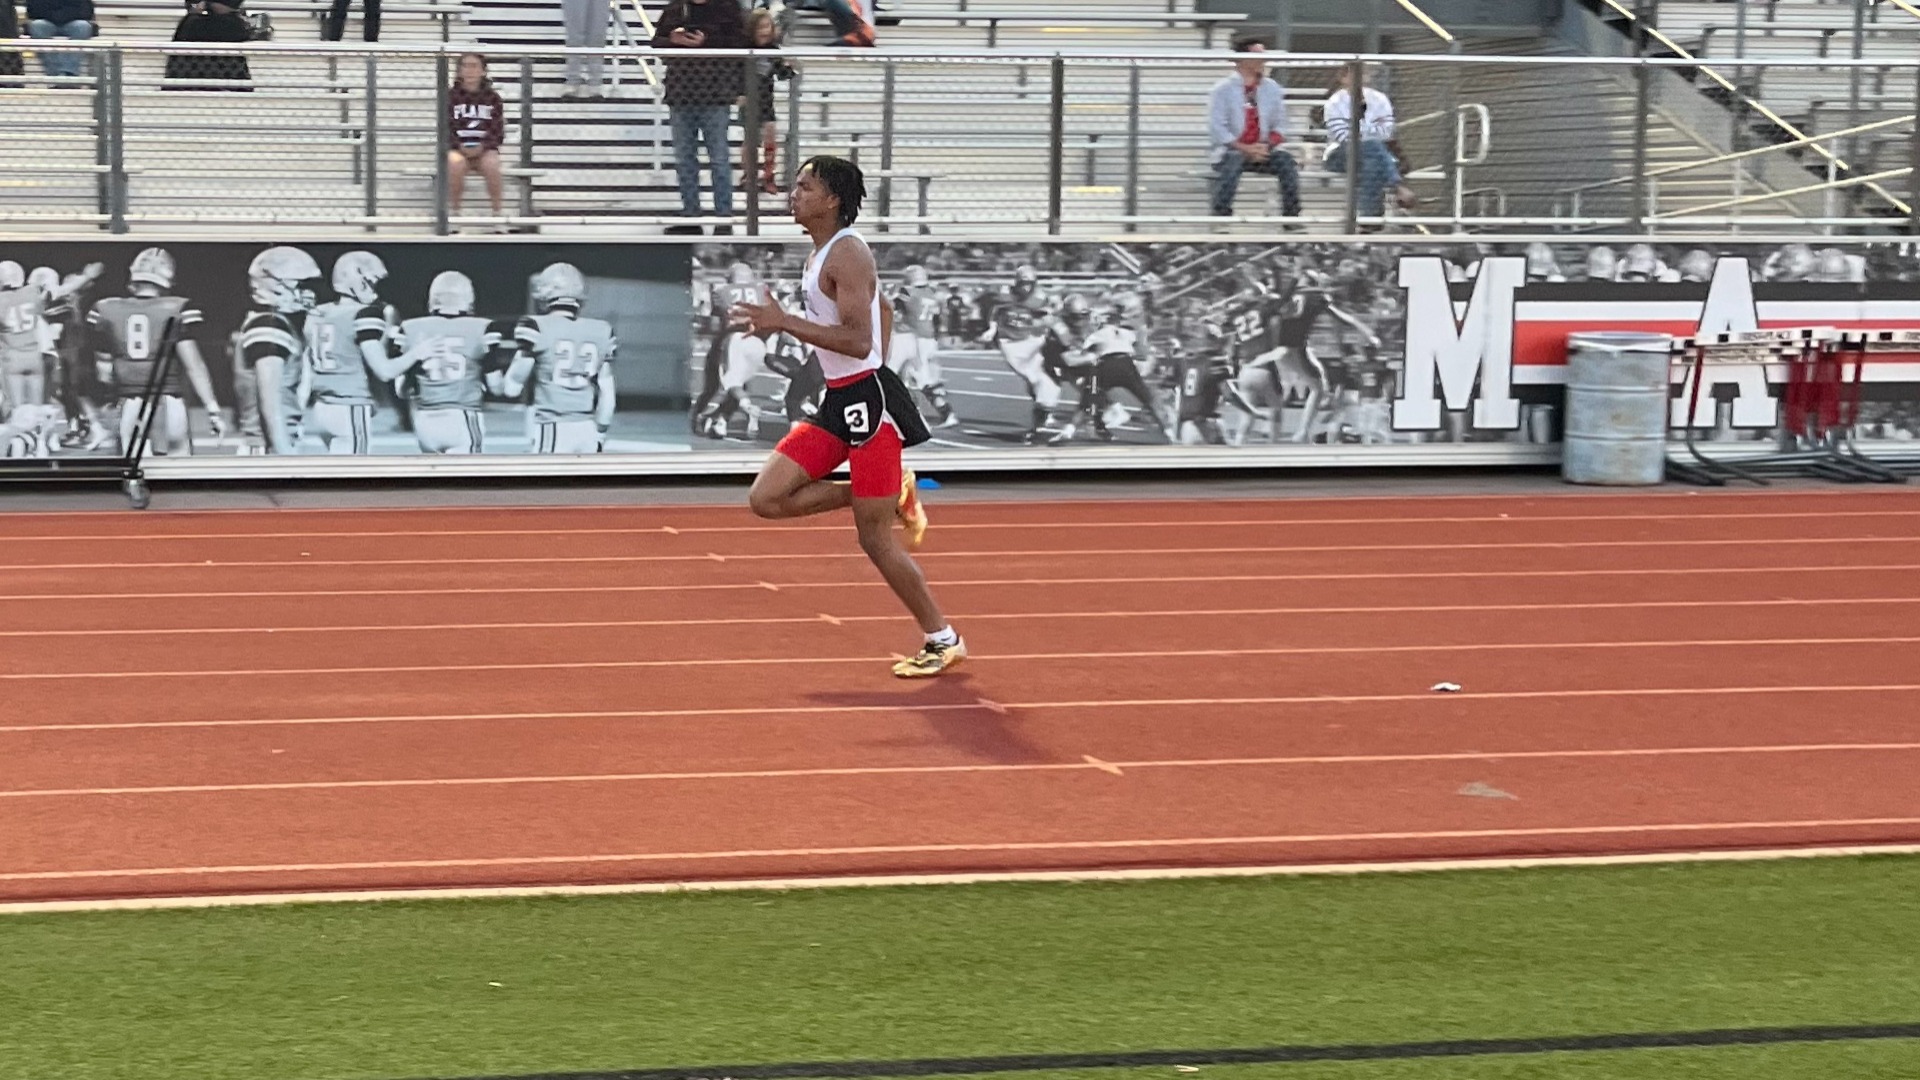 Coppell High SchoolSlide 8 - BOYS TRACK MOVES ON TO AREA